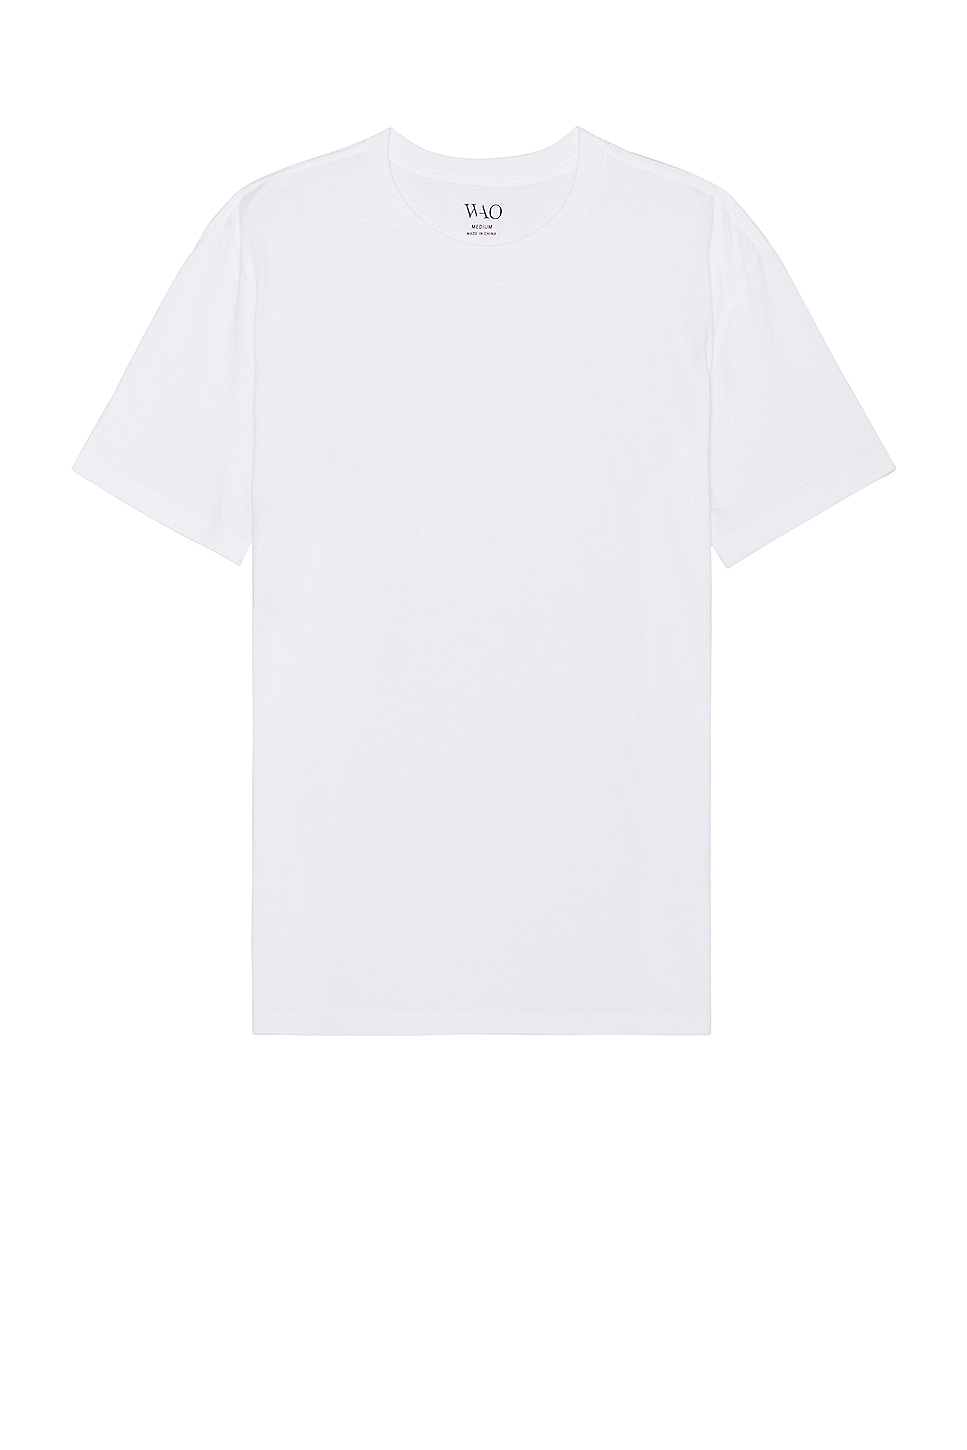 Image 1 of WAO The Standard Tee in white